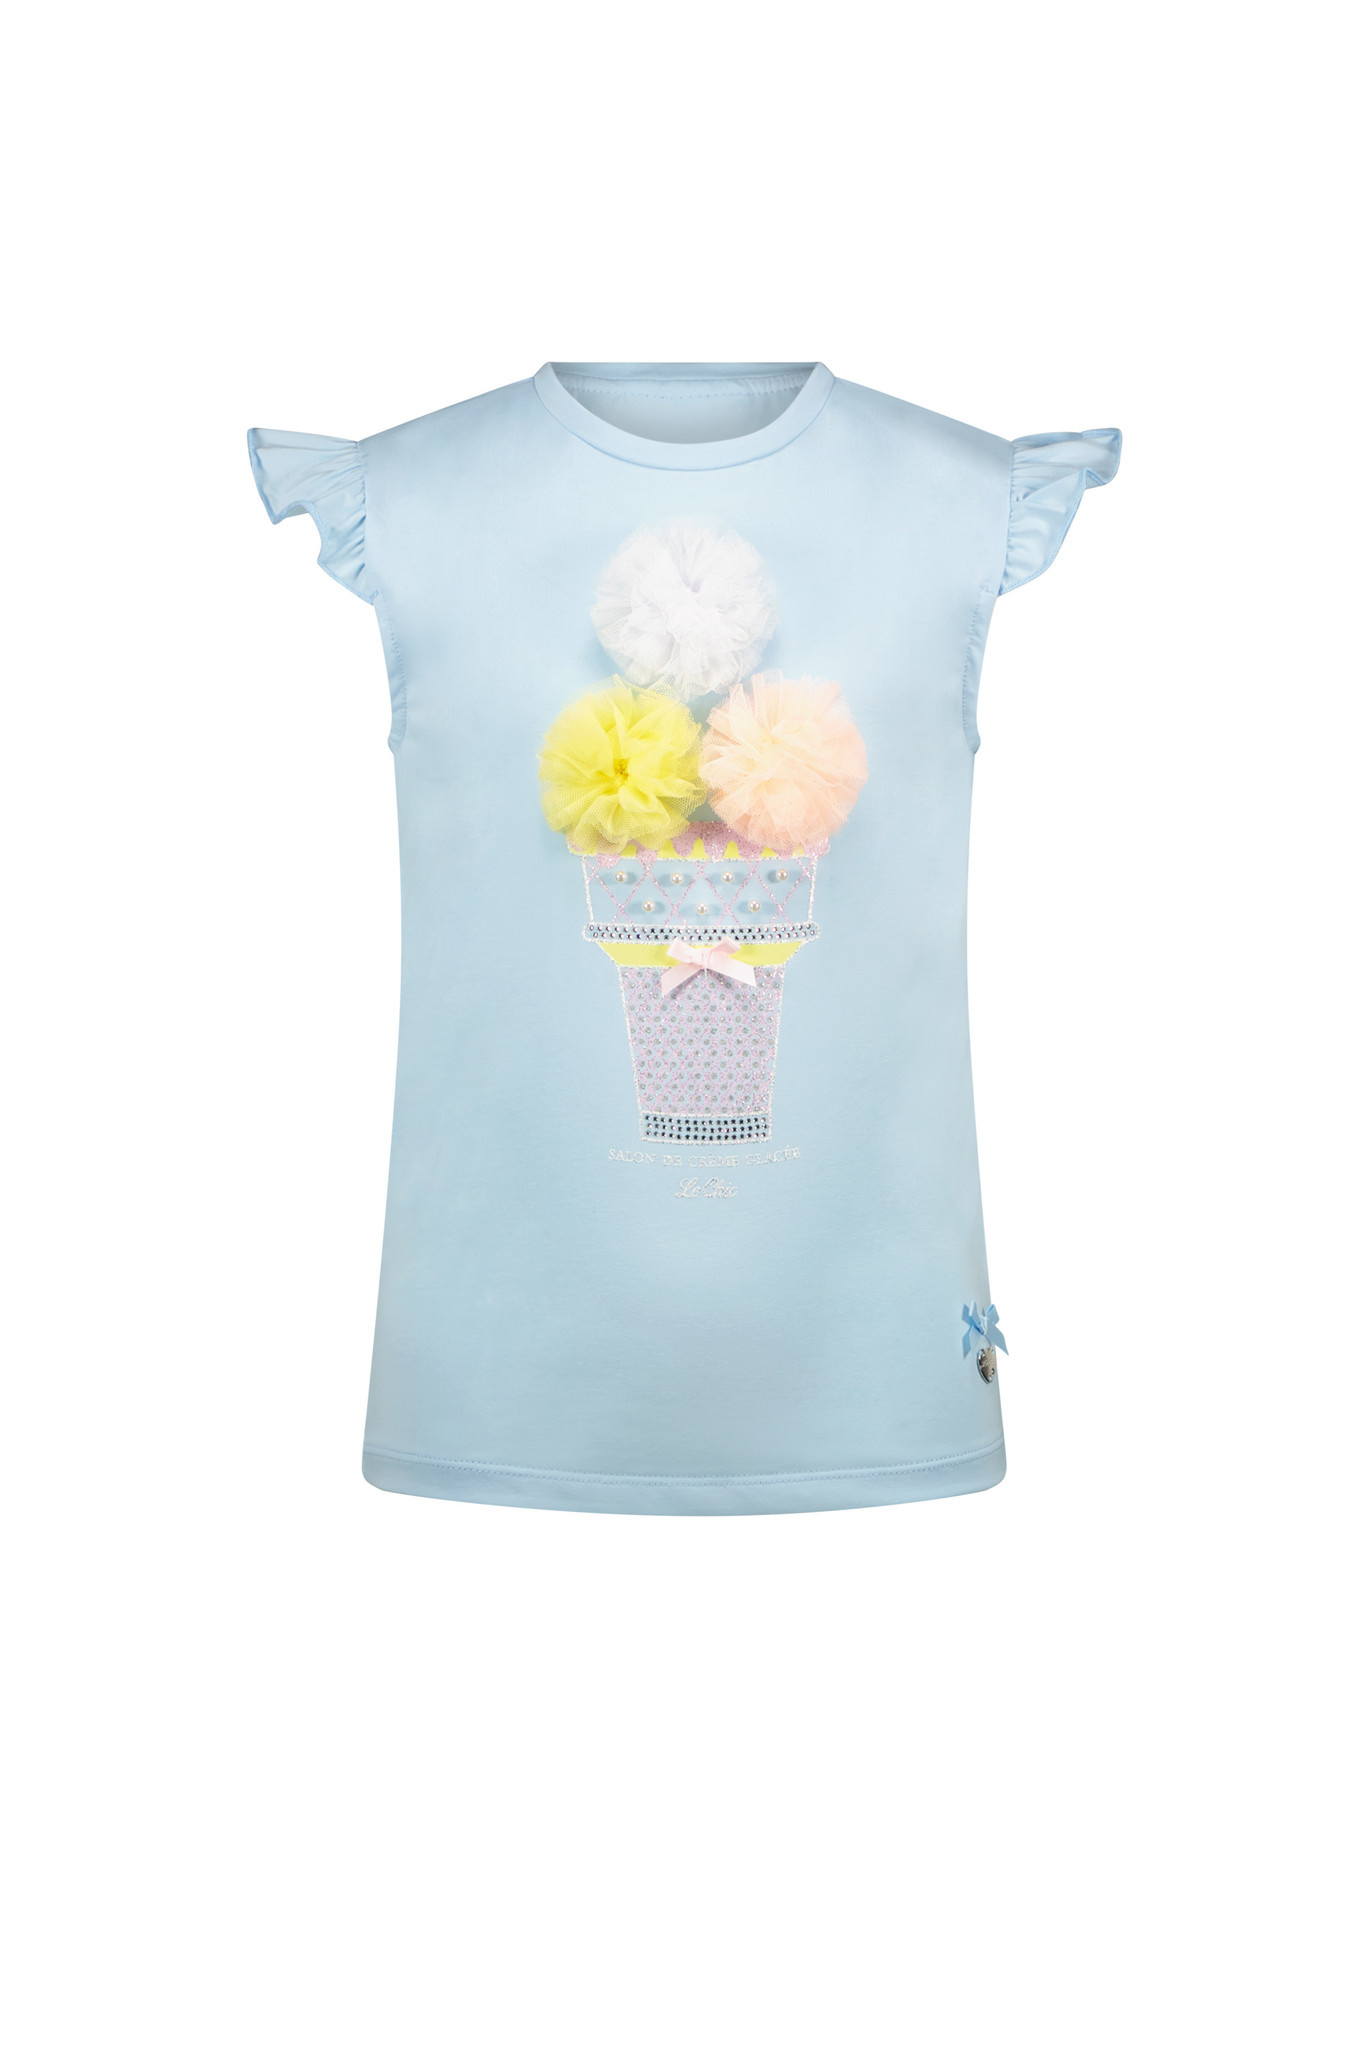 Le Chic Meisjes t-shirt ijs - Nosly - Song sung blauw